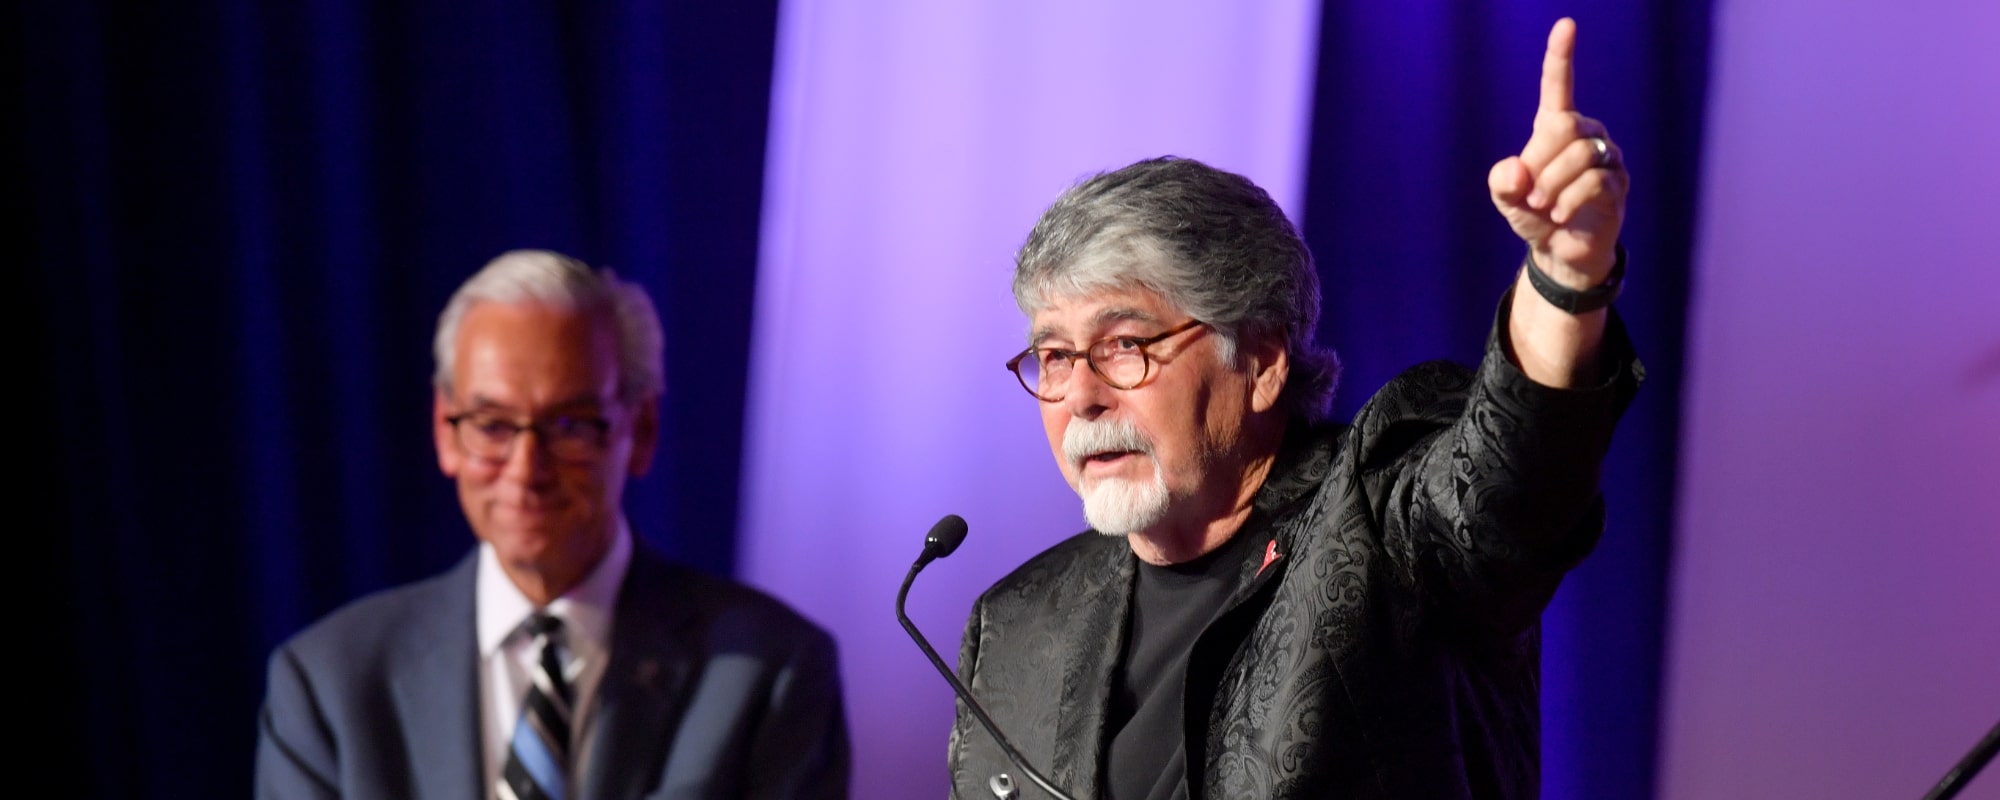 Randy Owen Says He Hopes Alabama Can Plot a New Tour in 2024: “I Enjoy Every Show”